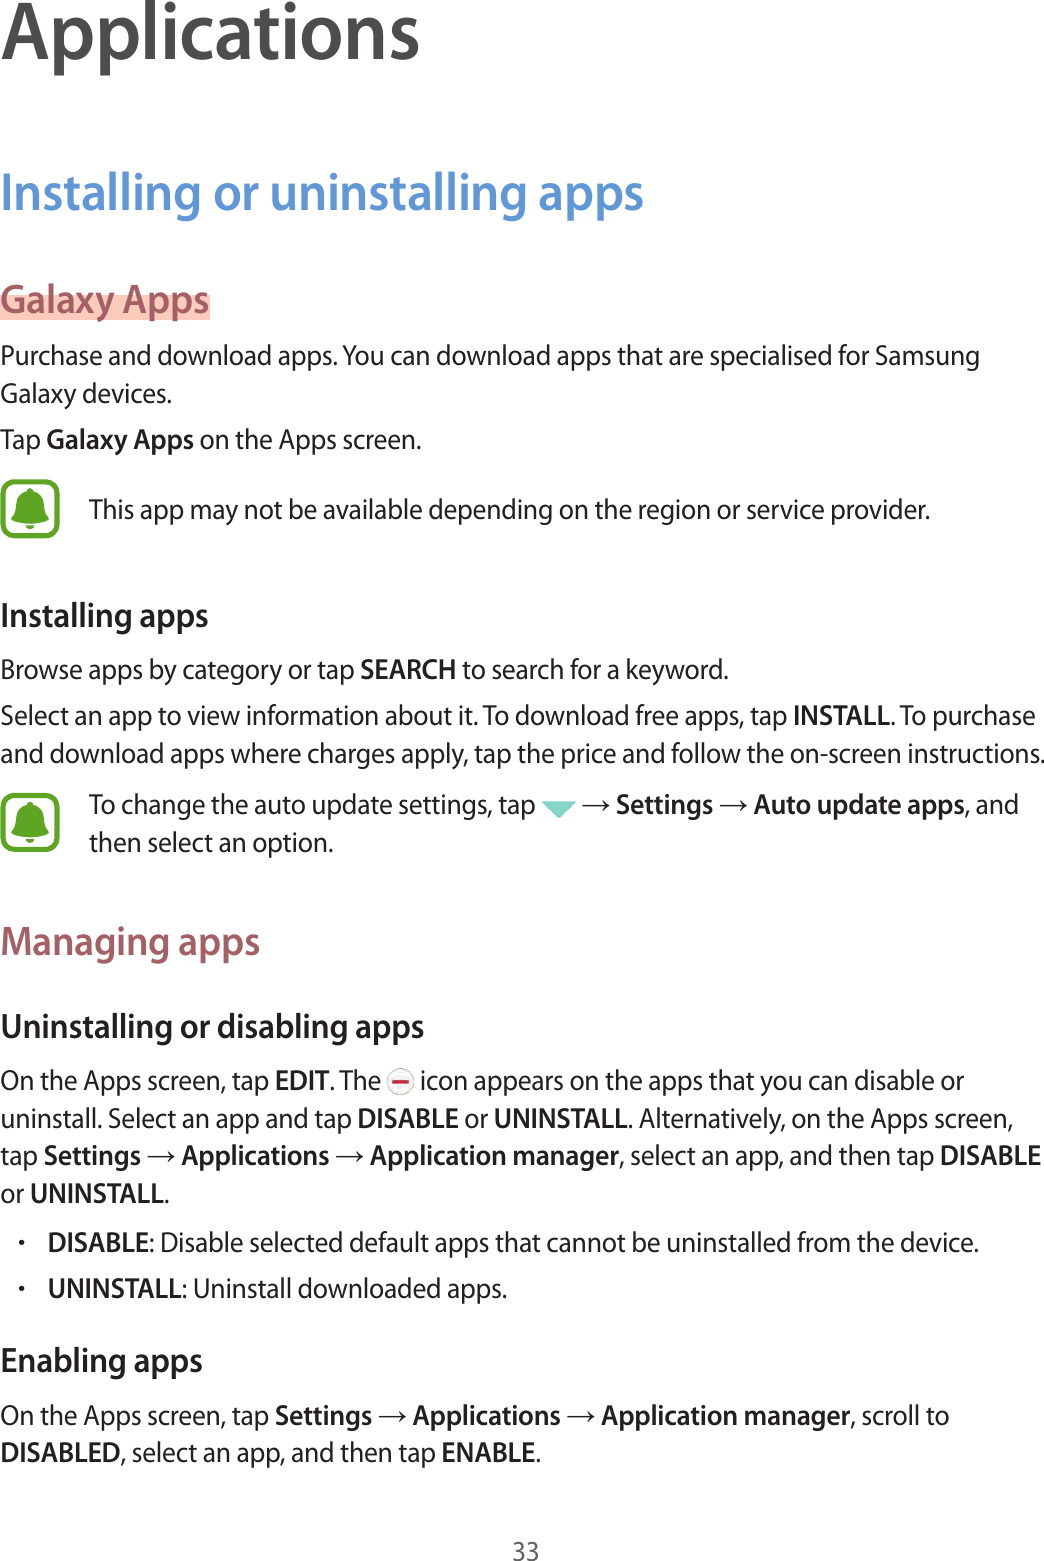 33ApplicationsInstalling or uninstalling appsGalaxy AppsPurchase and download apps. You can download apps that are specialised for Samsung Galaxy devices.Tap Galaxy Apps on the Apps screen.This app may not be available depending on the region or service provider.Installing appsBrowse apps by category or tap SEARCH to search for a keyword.Select an app to view information about it. To download free apps, tap INSTALL. To purchase and download apps where charges apply, tap the price and follow the on-screen instructions.To change the auto update settings, tap   → Settings → Auto update apps, and then select an option.Managing appsUninstalling or disabling appsOn the Apps screen, tap EDIT. The   icon appears on the apps that you can disable or uninstall. Select an app and tap DISABLE or UNINSTALL. Alternatively, on the Apps screen, tap Settings → Applications → Application manager, select an app, and then tap DISABLE or UNINSTALL.•DISABLE: Disable selected default apps that cannot be uninstalled from the device.•UNINSTALL: Uninstall downloaded apps.Enabling appsOn the Apps screen, tap Settings → Applications → Application manager, scroll to DISABLED, select an app, and then tap ENABLE.